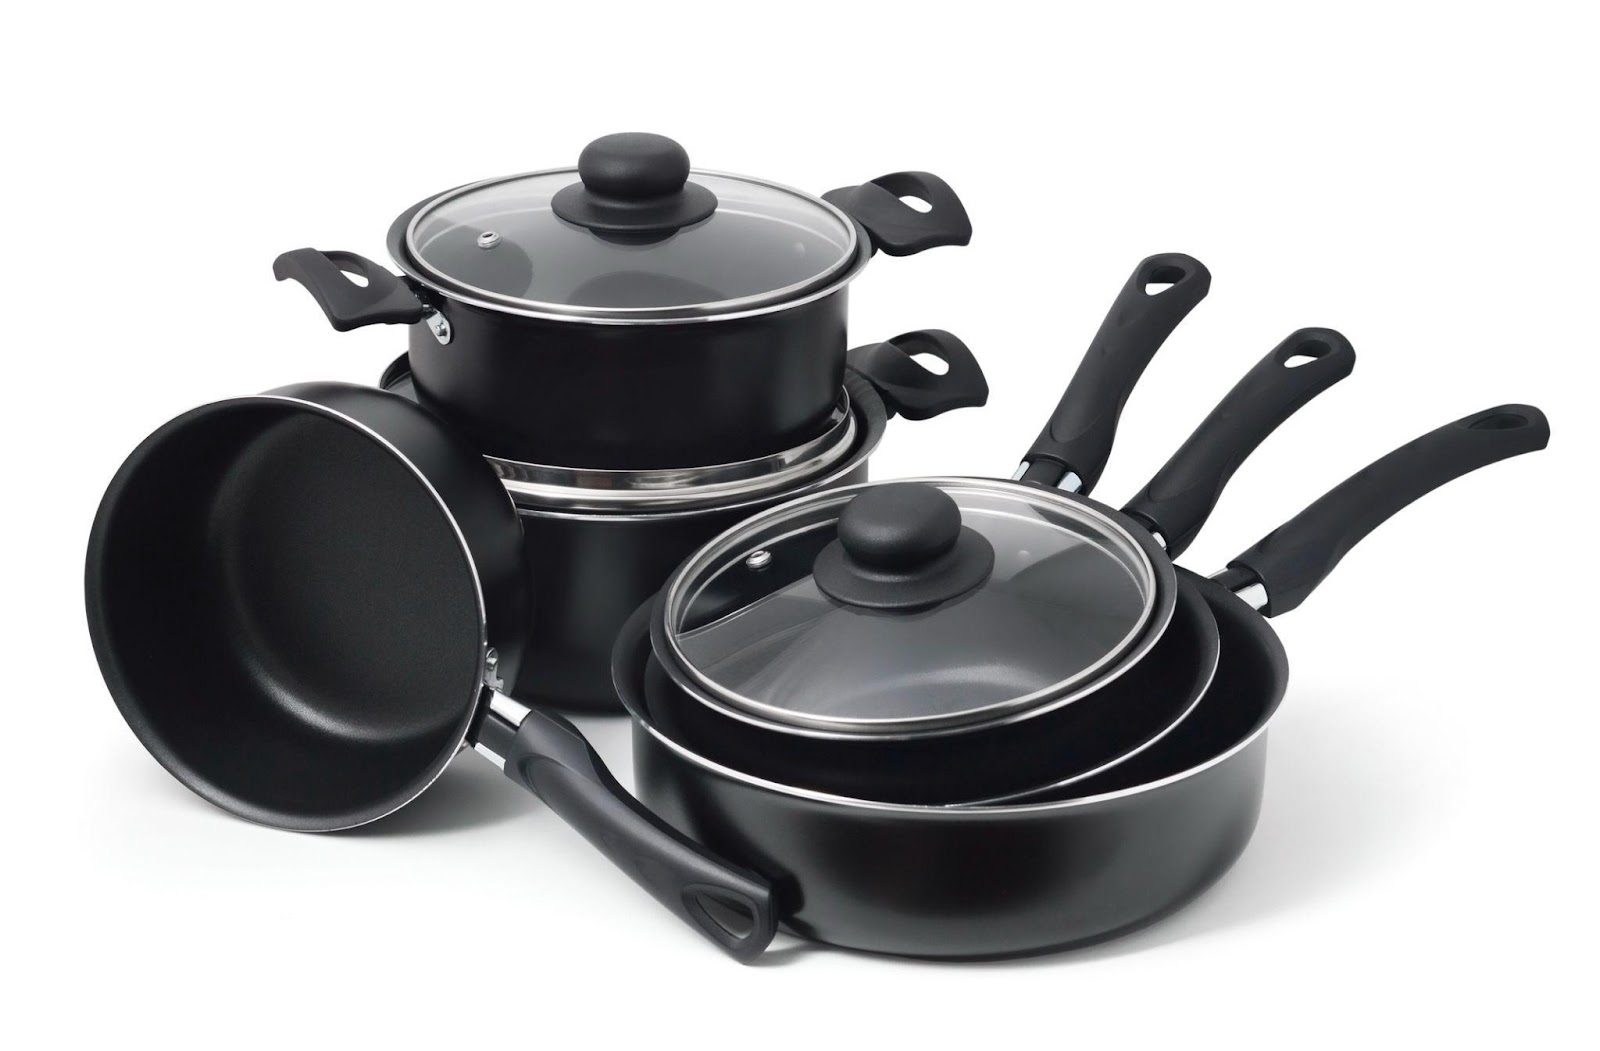 The non-stick in non-stick cookware is from PFAS